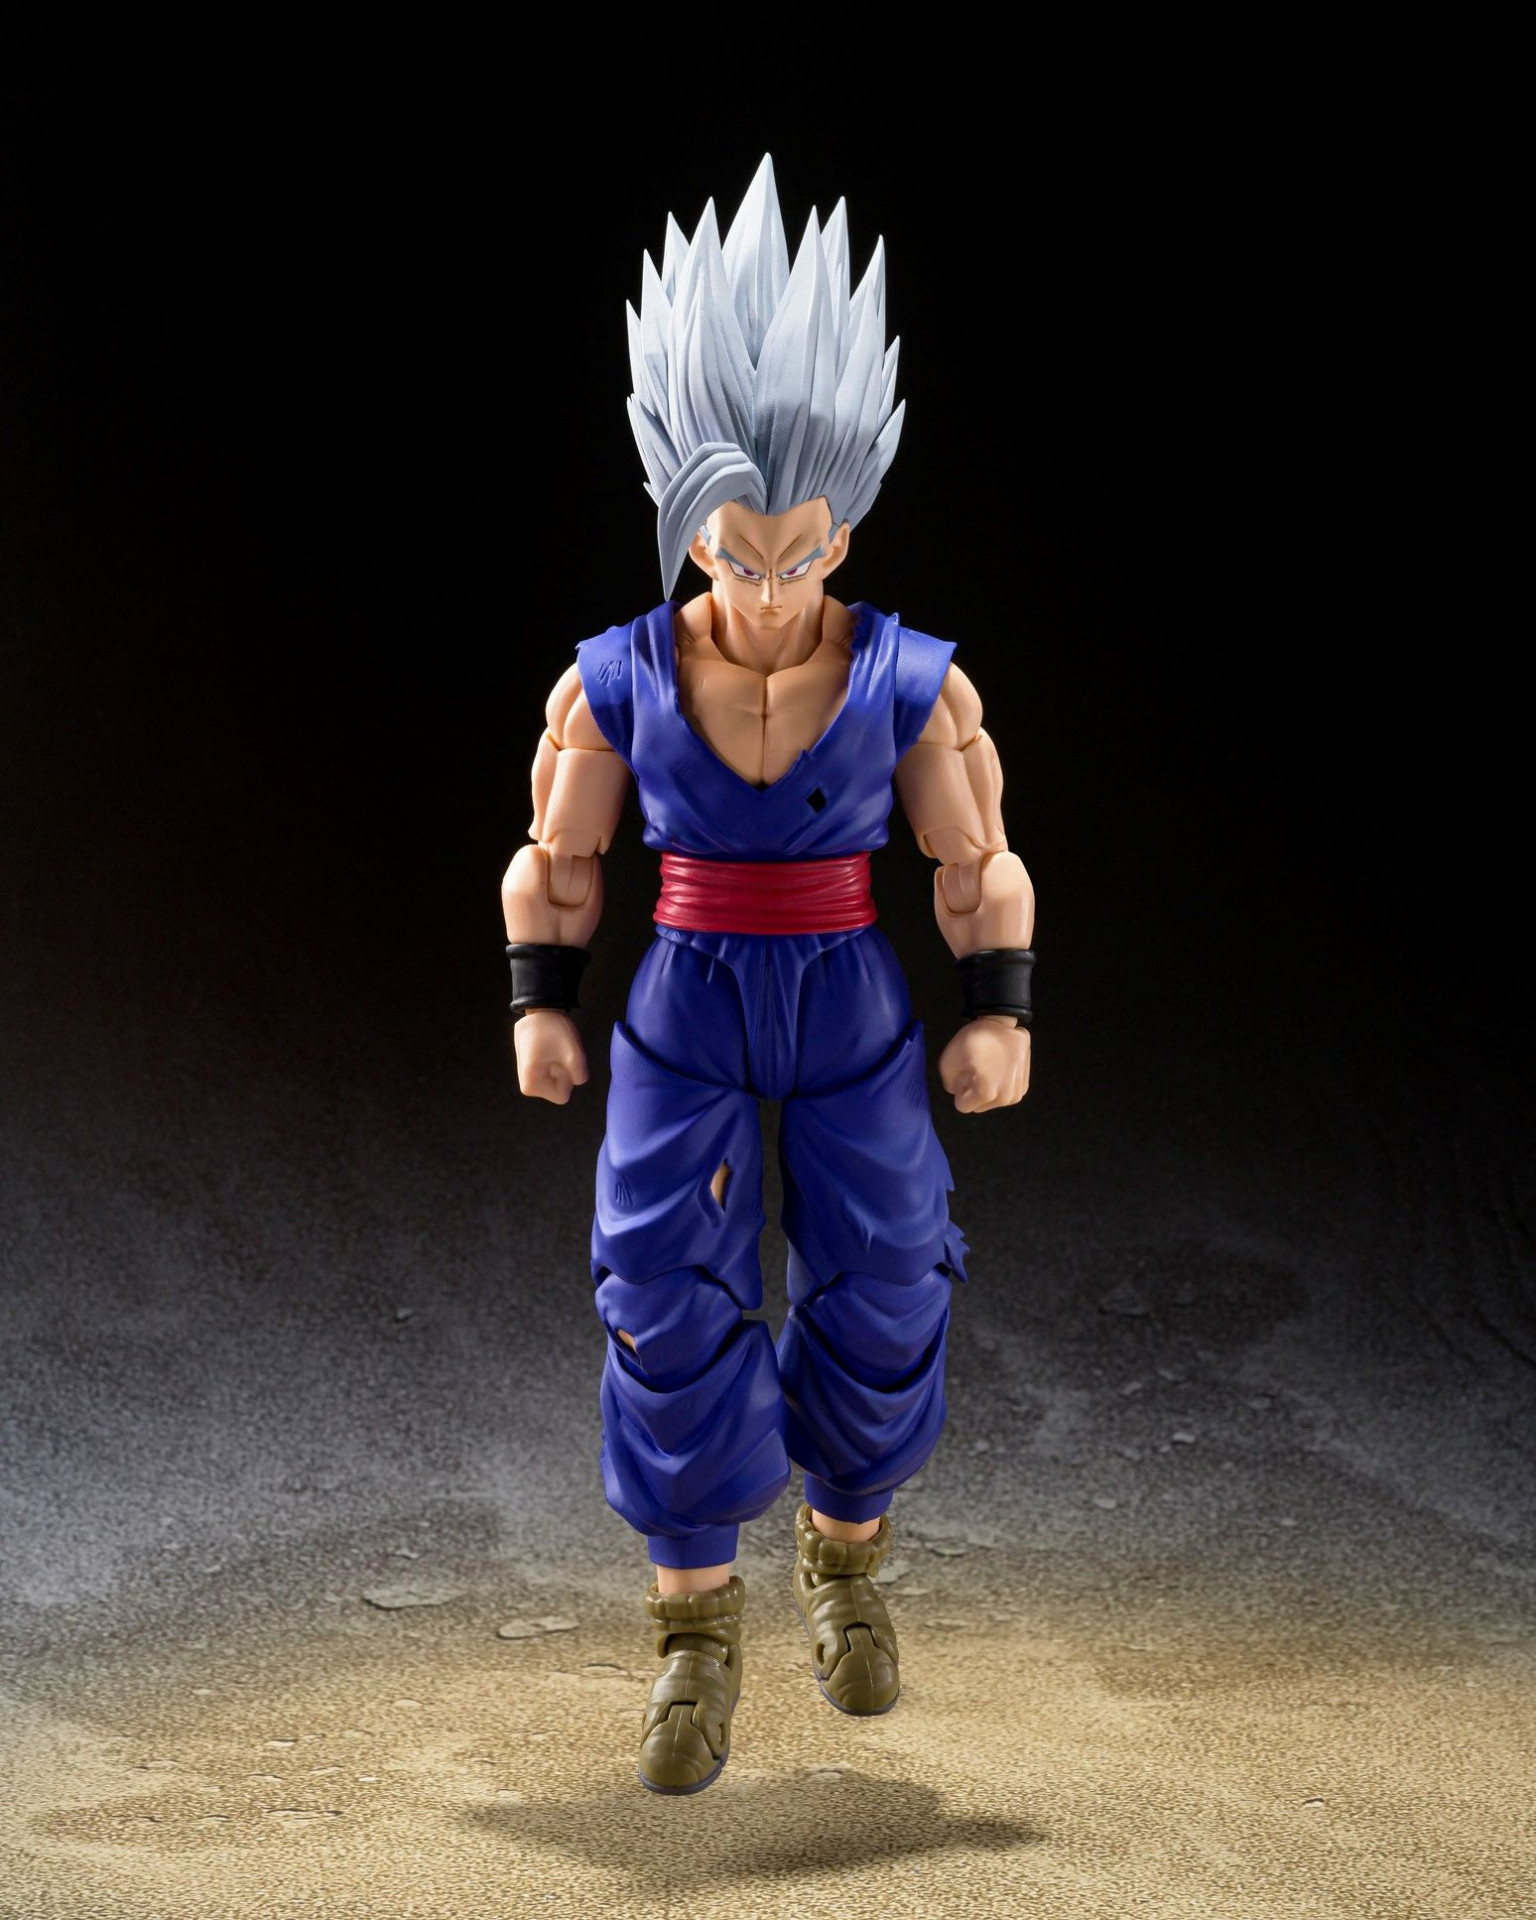 Gohan Beast from Dragon Ball Super: SUPER HERO Finally Joins the S.H.Figuarts Lineup!